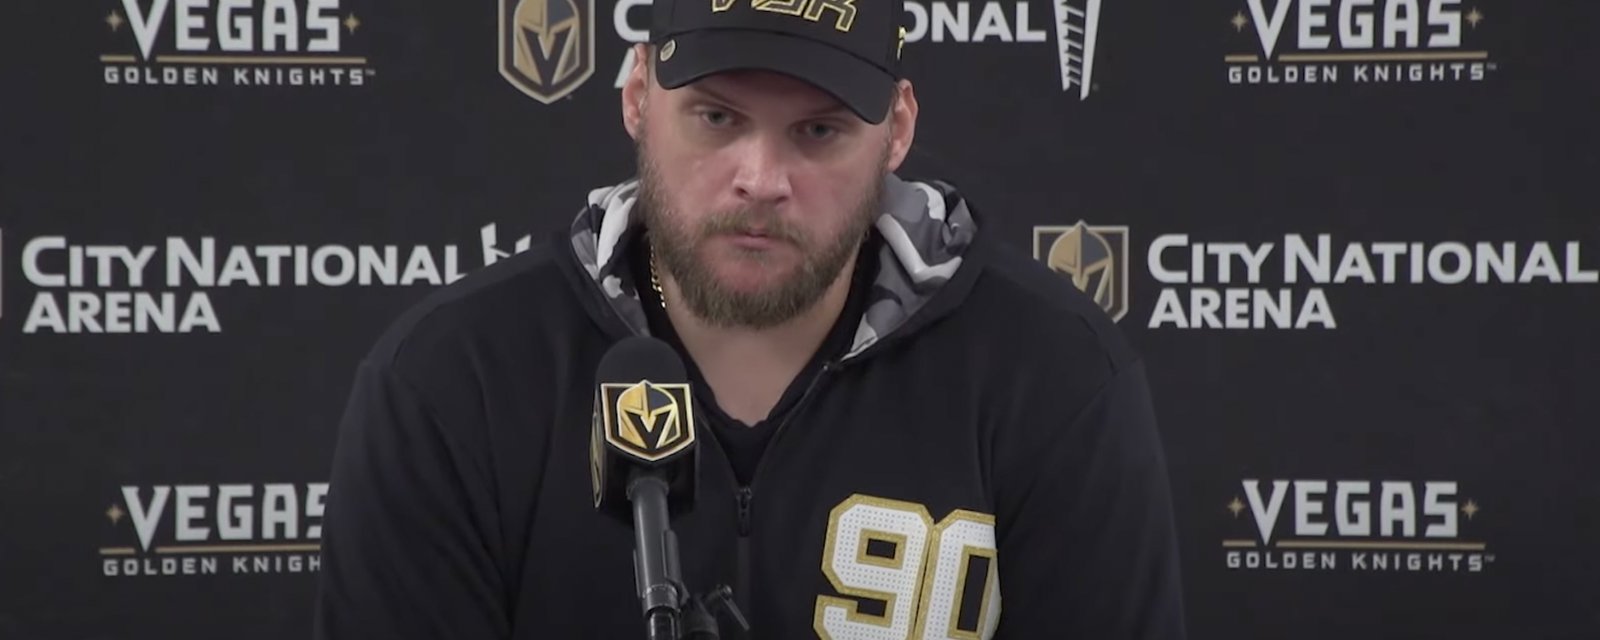 Emotional Lehner explains “cry for help” and desire to help younger generations following Twitter allegations 